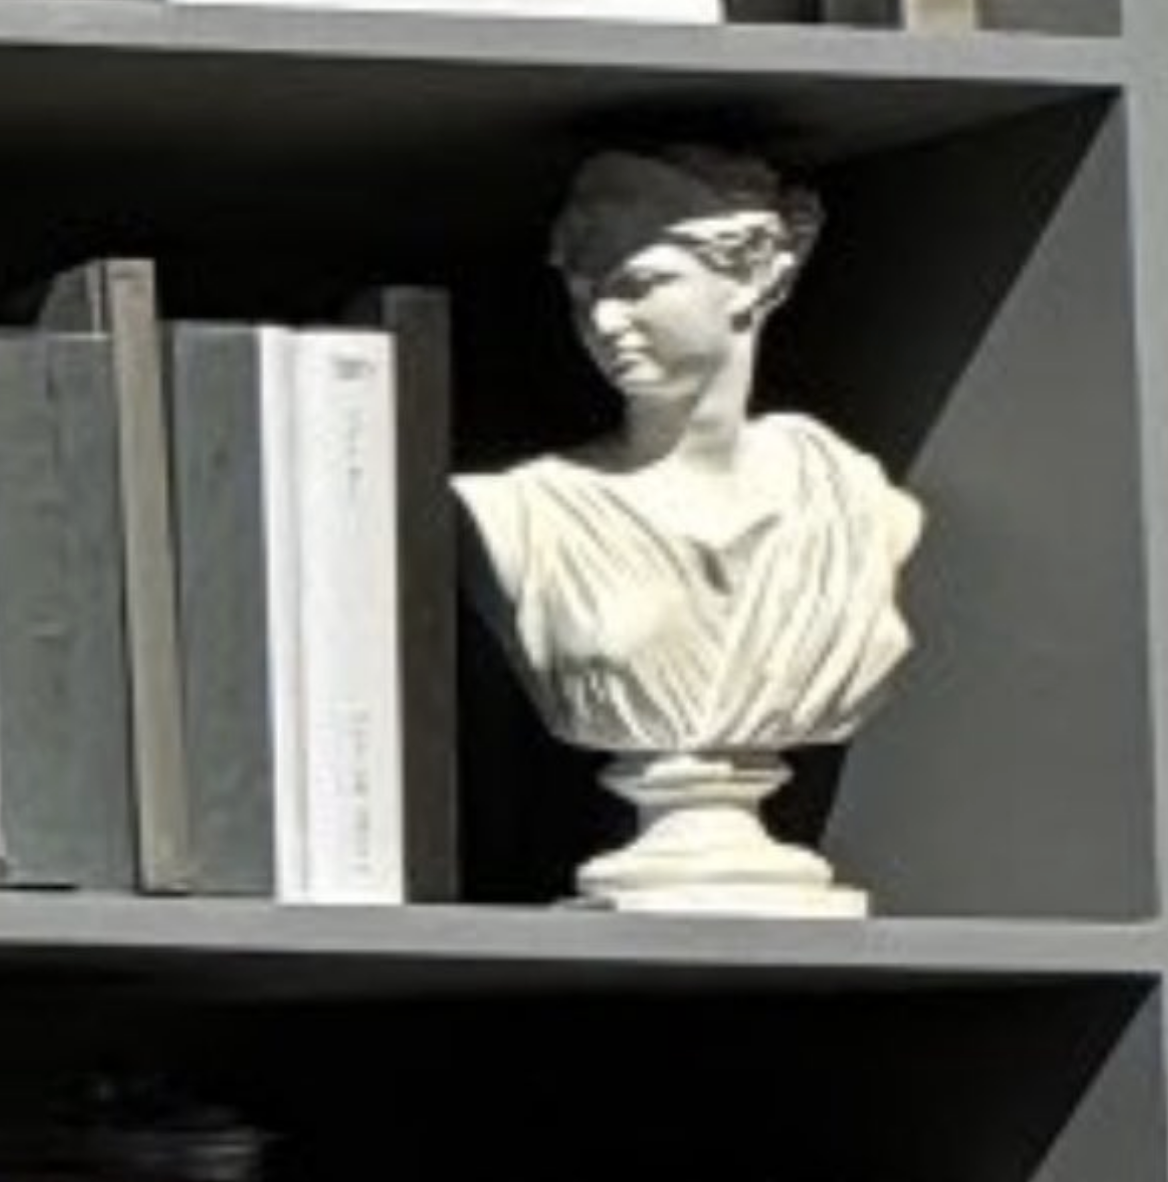 Bust of a classical figure next to books on a shelf